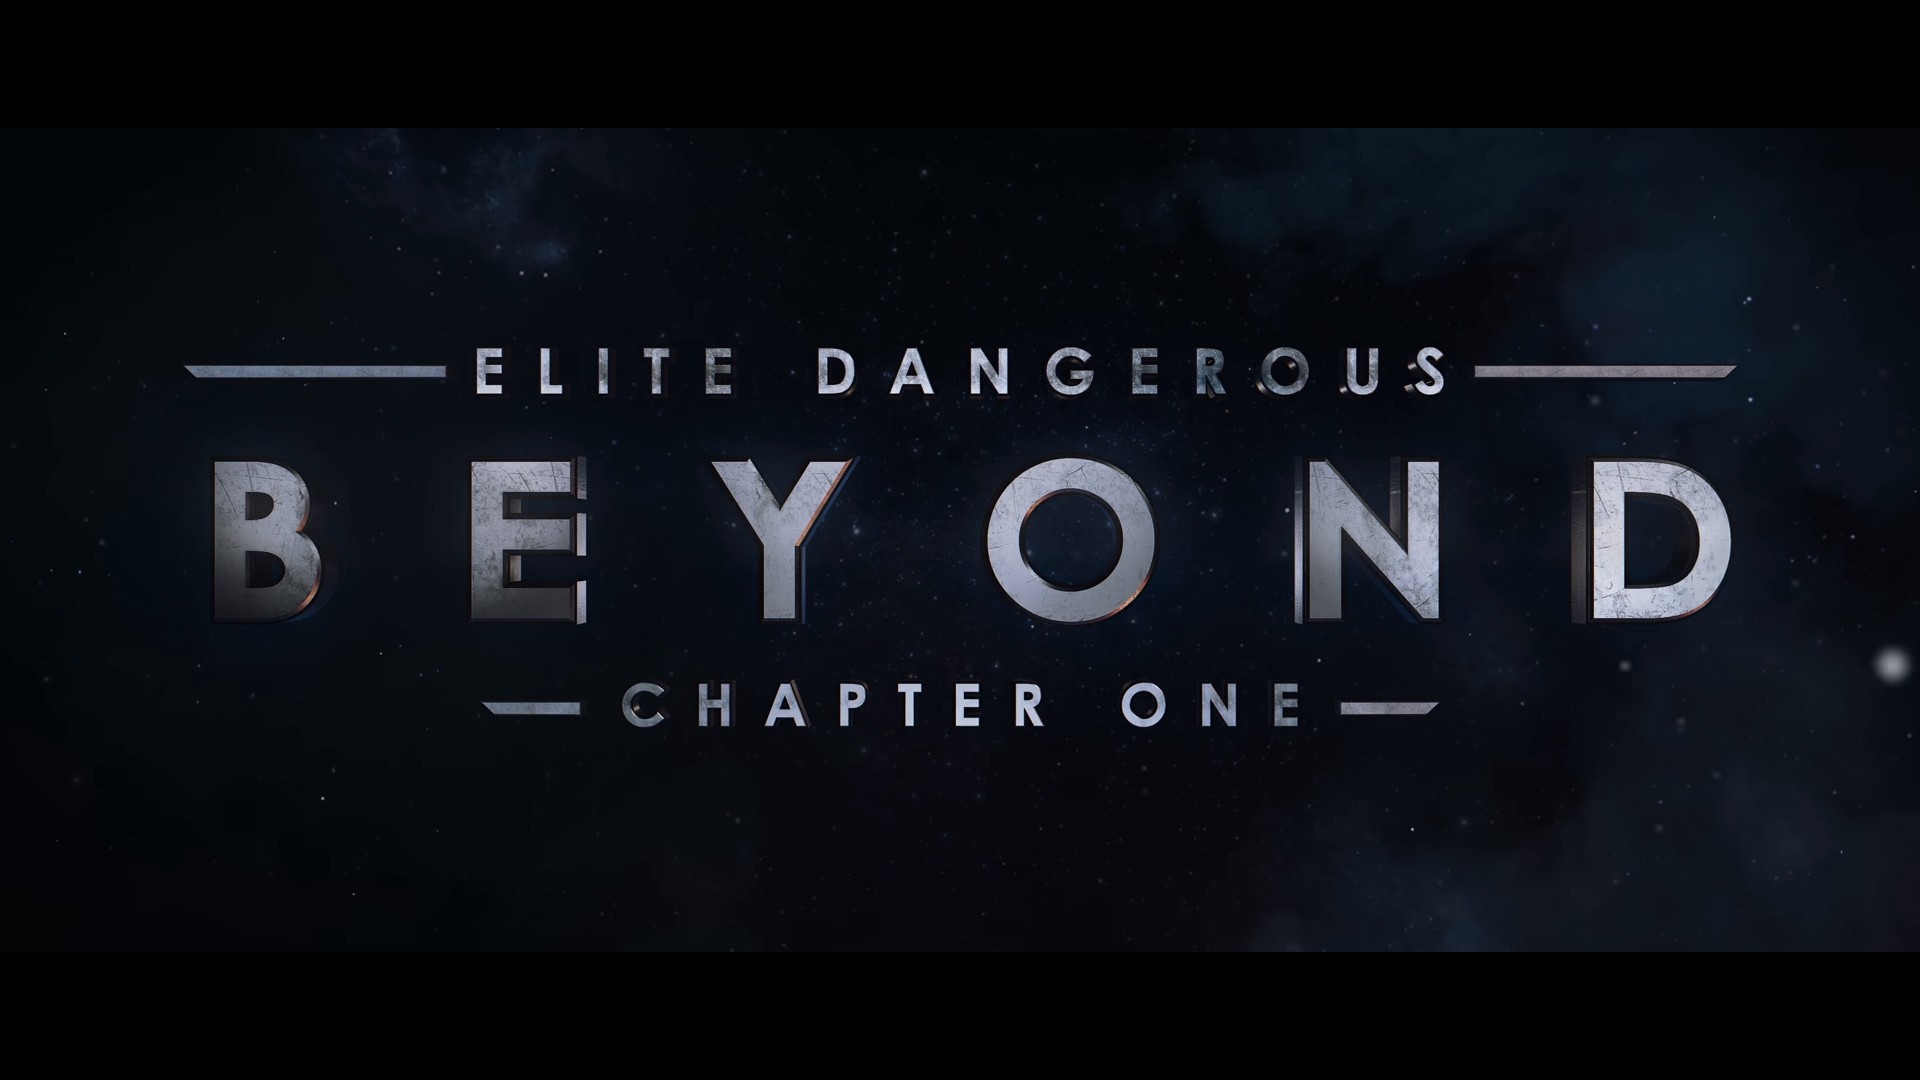 Beyond Chapter One